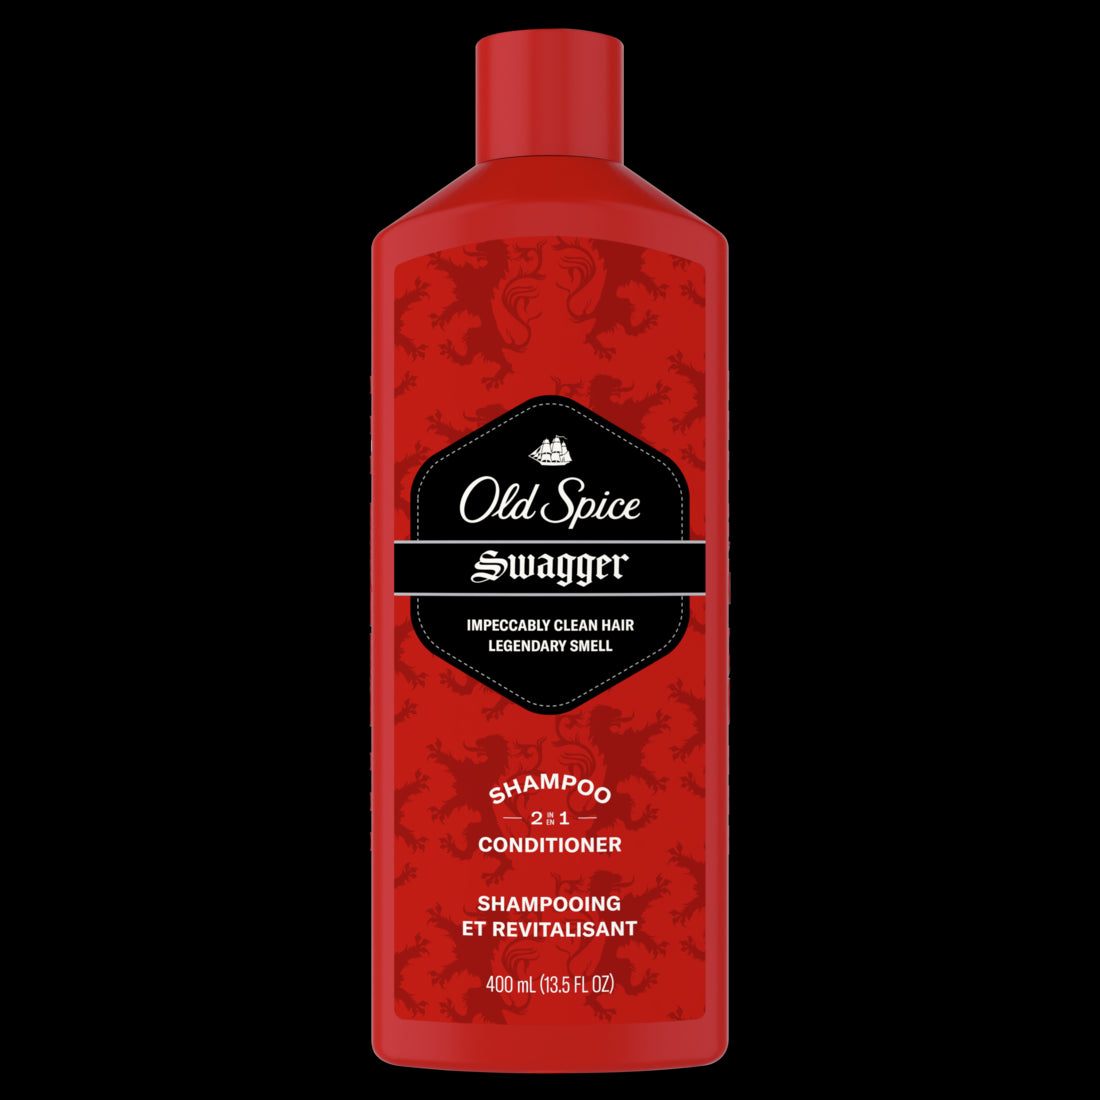 Old Spice Swagger 2in1 Shampoo and Conditioner for Men - 13.5oz/6pk